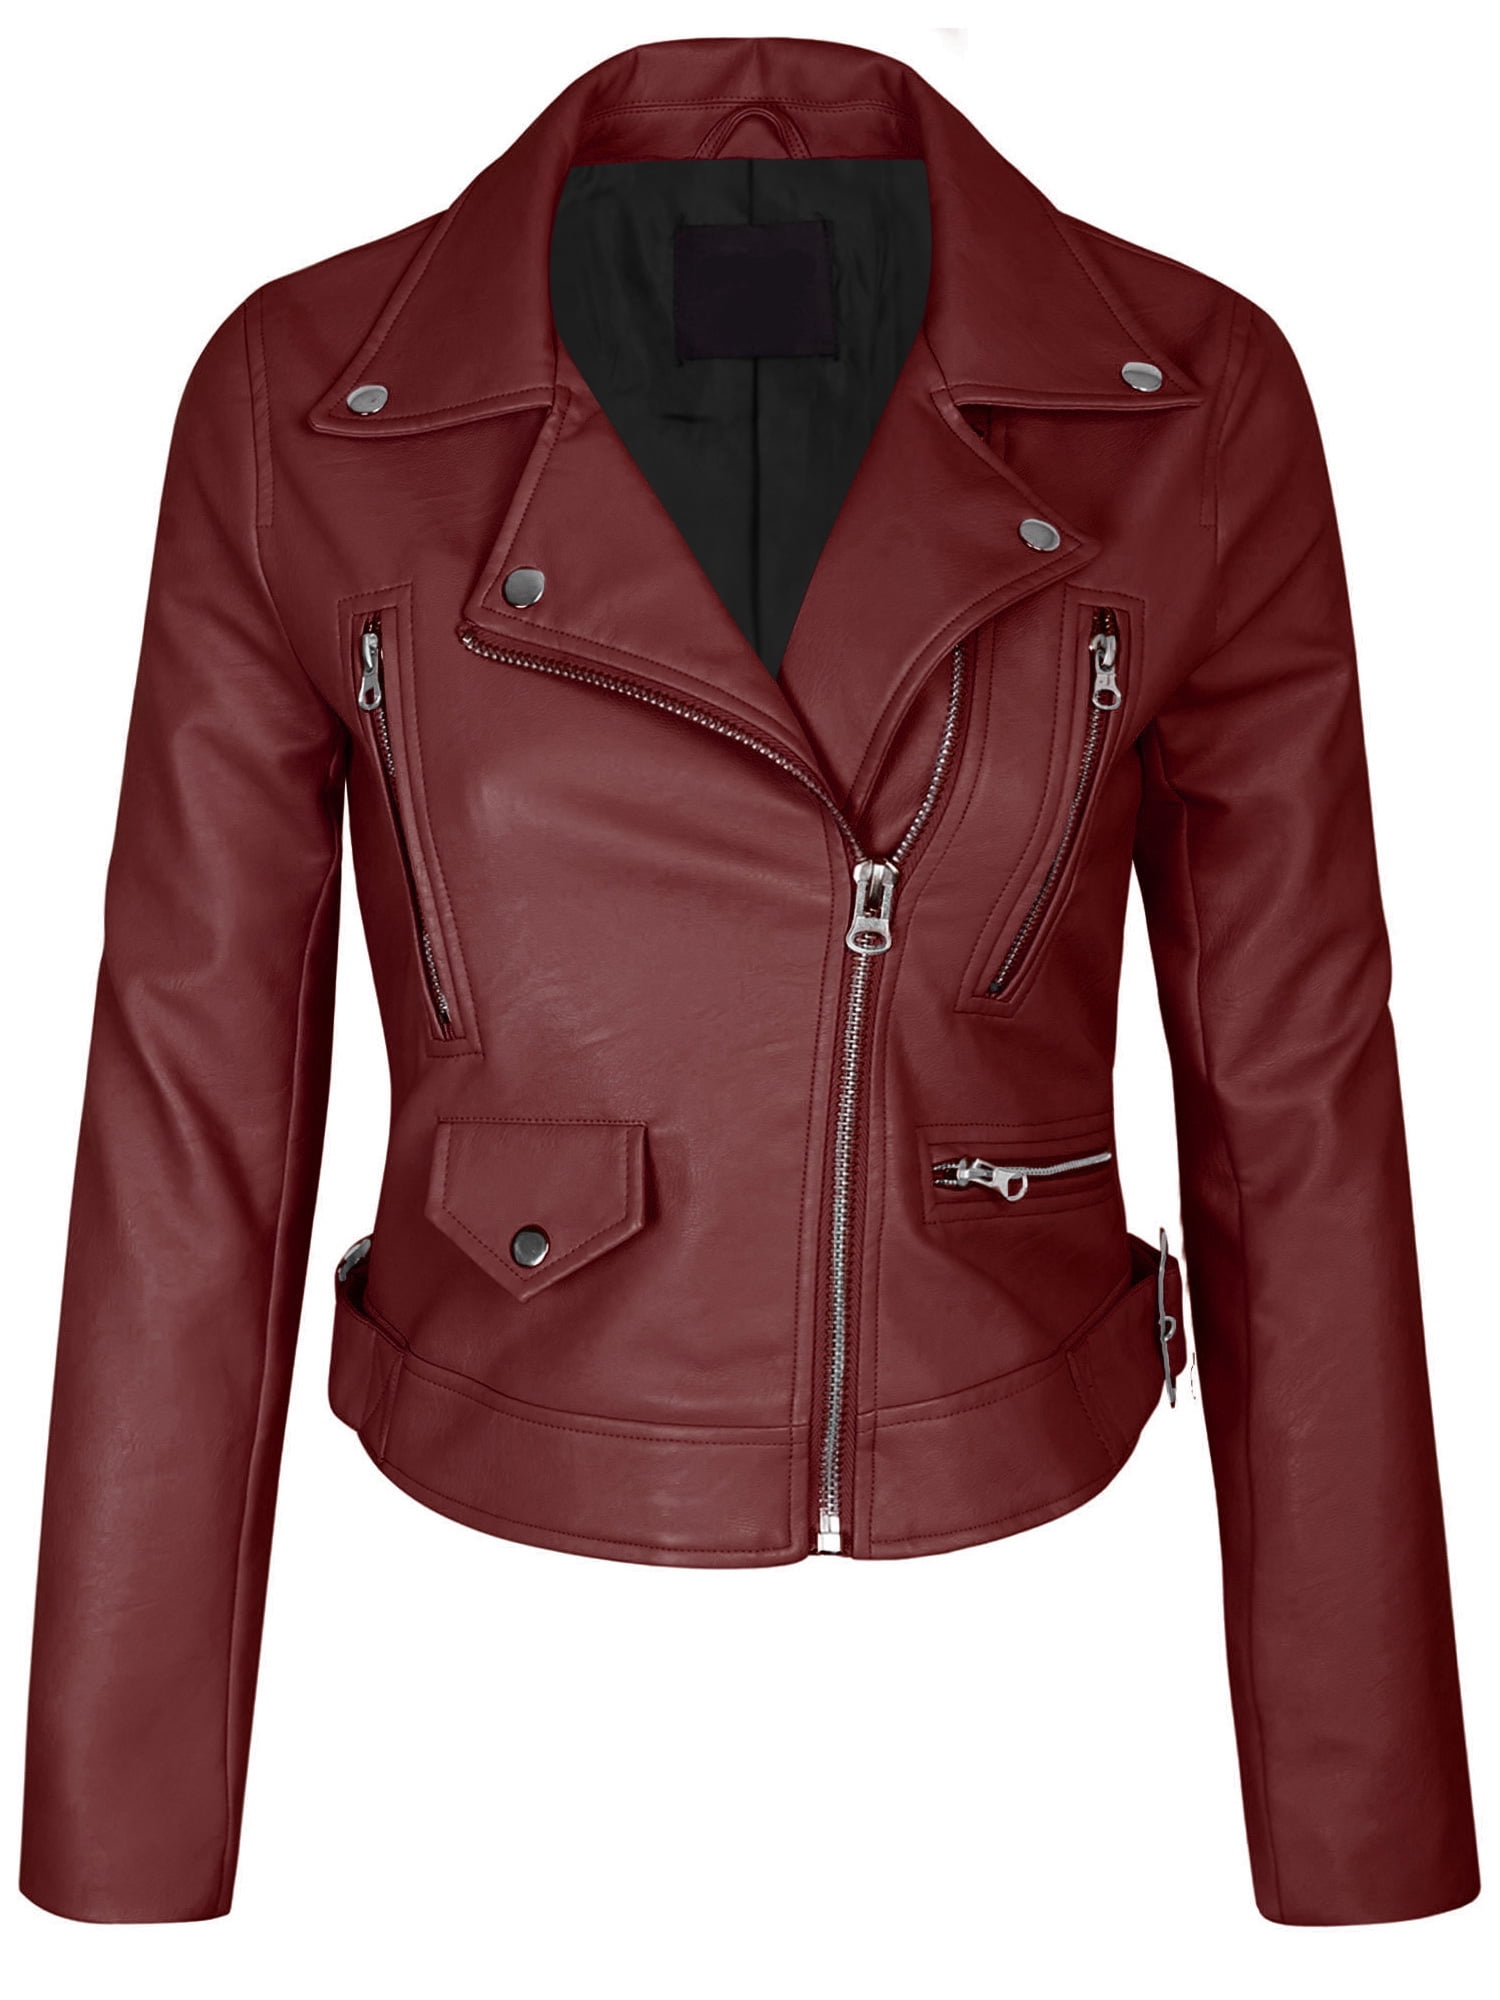 KOGMO Womens Double Breasted Faux Leather Zip Up Jacket - Walmart.com